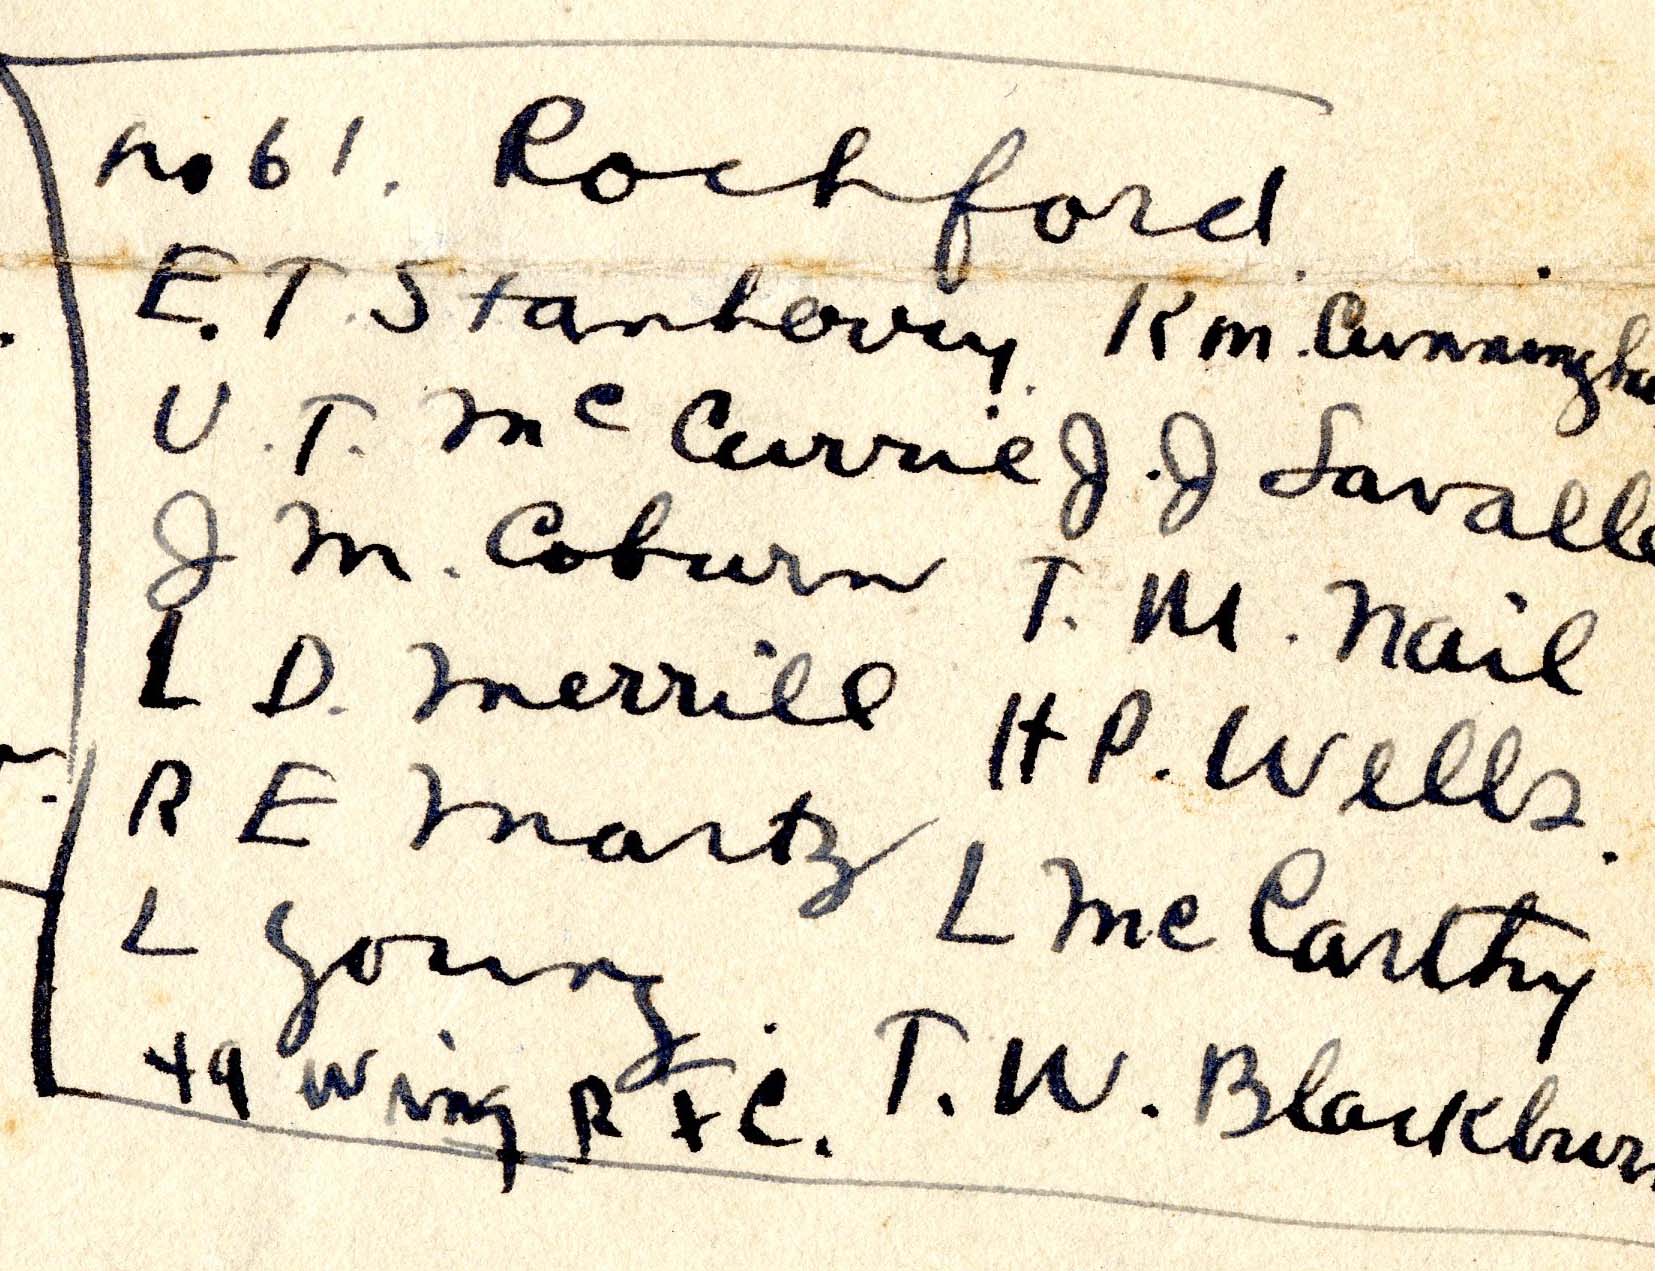 Portion of handwritten page. The portion is headed No. 61 Rochford and lists twelve names: E. T. Stanberry, U. T. McCurrie, J. M. coburn, L. D. Merrill, R. E. Martz, L. Young, R. M. Cunningham, J. J. Lavalle, T. M. Nail, H. P. Wells, L. McCarthy, T. W. Blackburn. At the bottom is the notation: "49 Wing R.F.C."